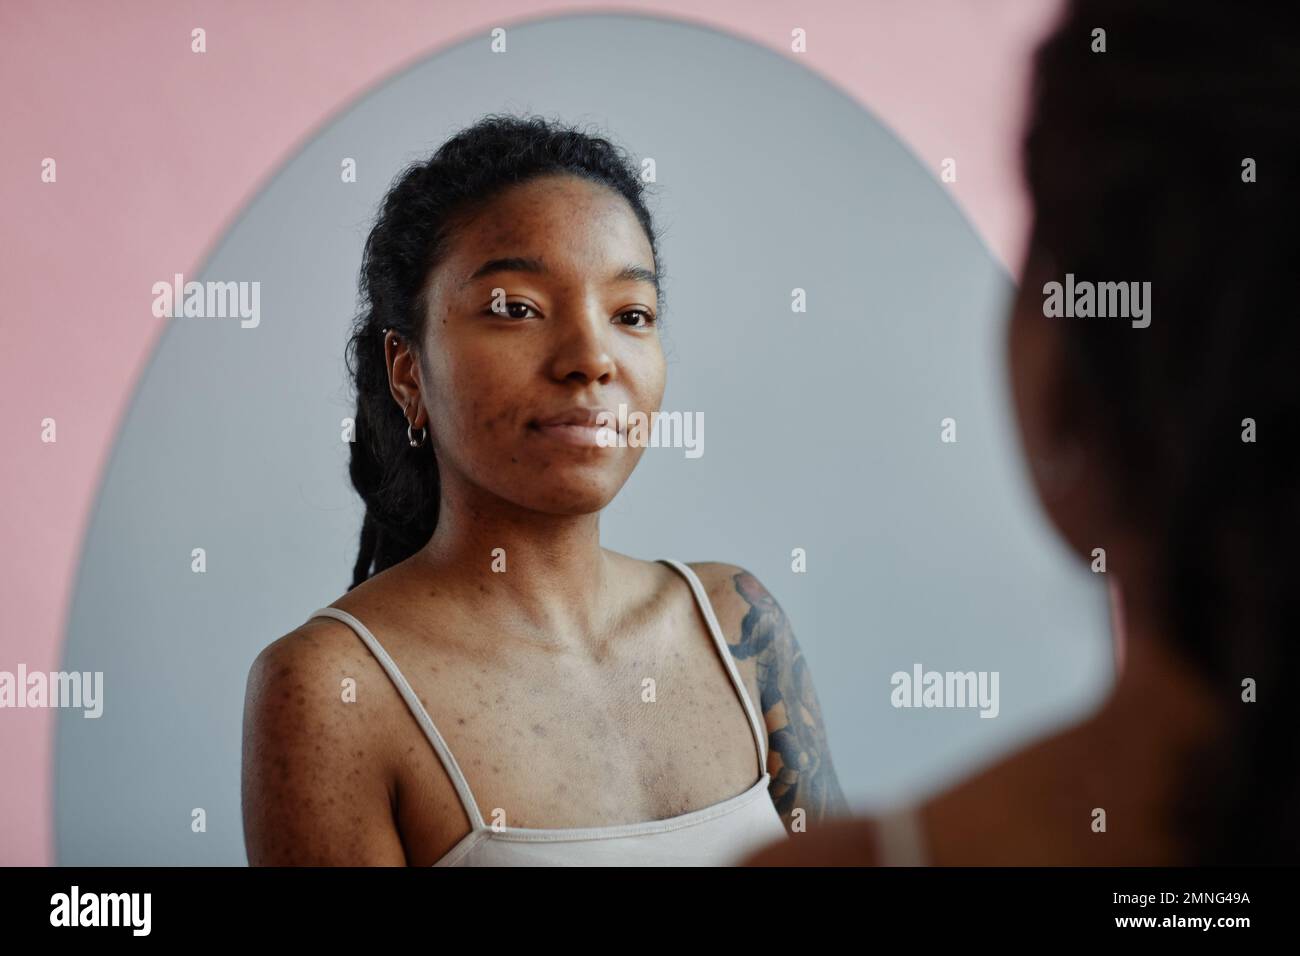 Young black woman with tattoos and acne scars looking in mirror smiling Stock Photo